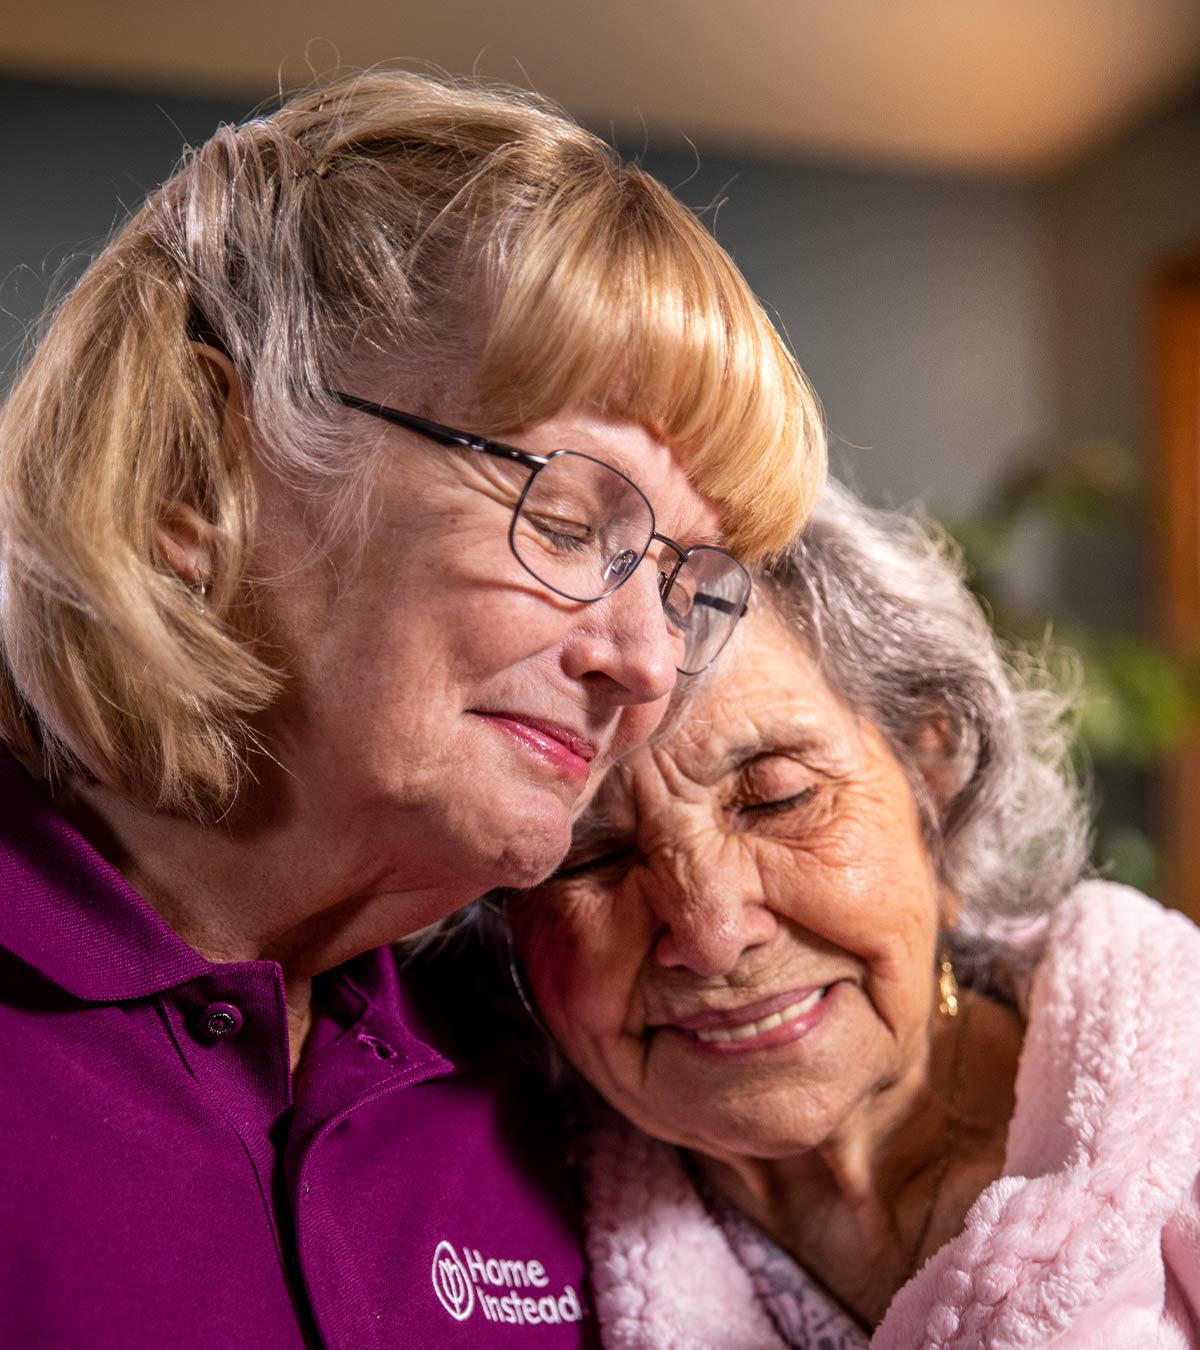 CAREGiver providing in-home senior care services. Home Instead of Vero Beach, FL provides Elder Care to aging adults. 